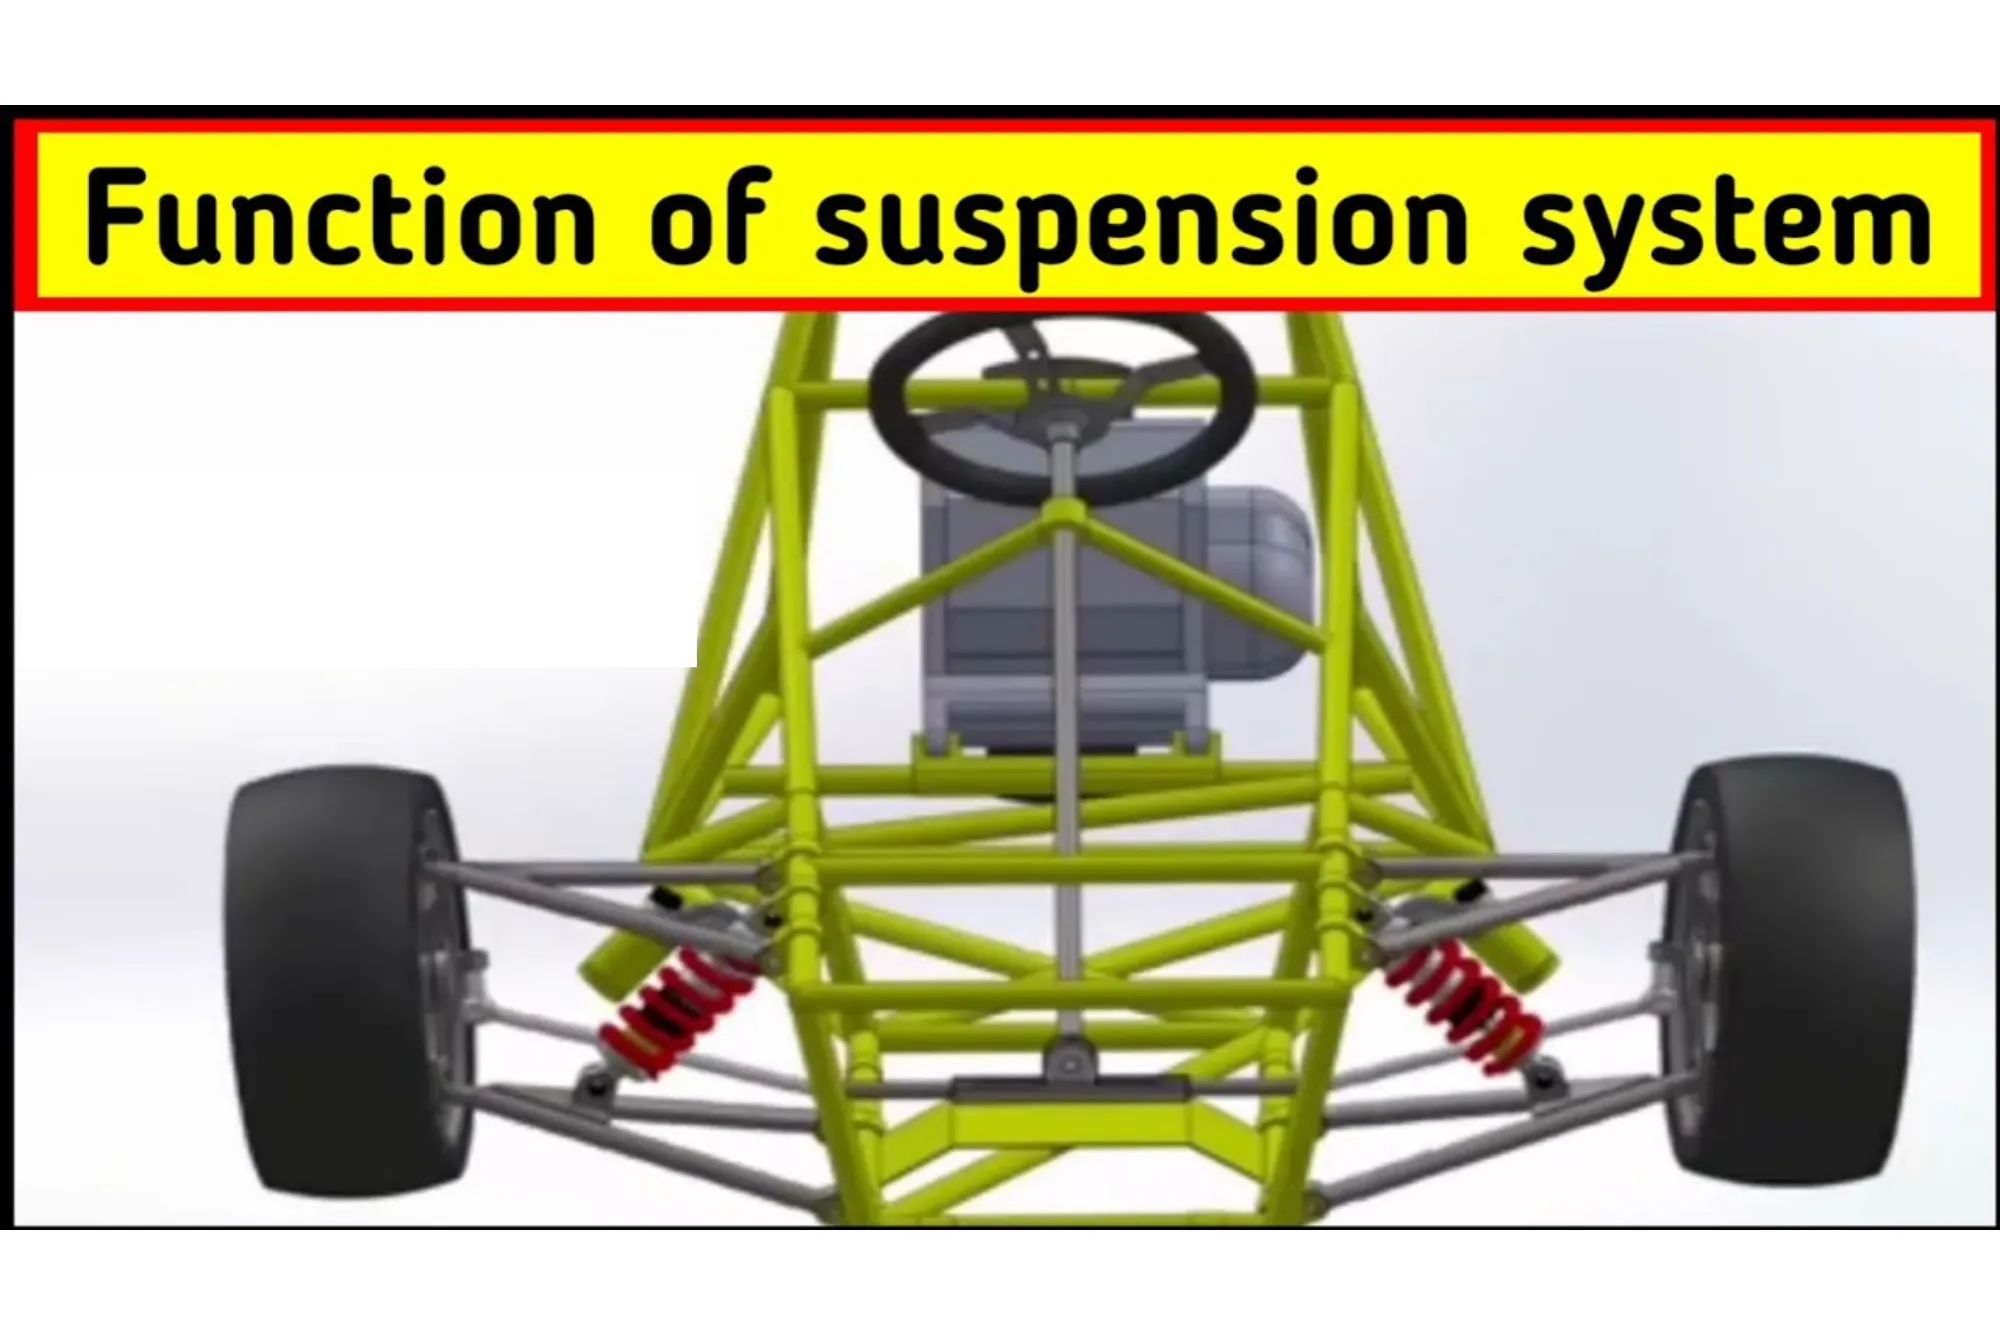 What is the Function of Suspension System in Automobile